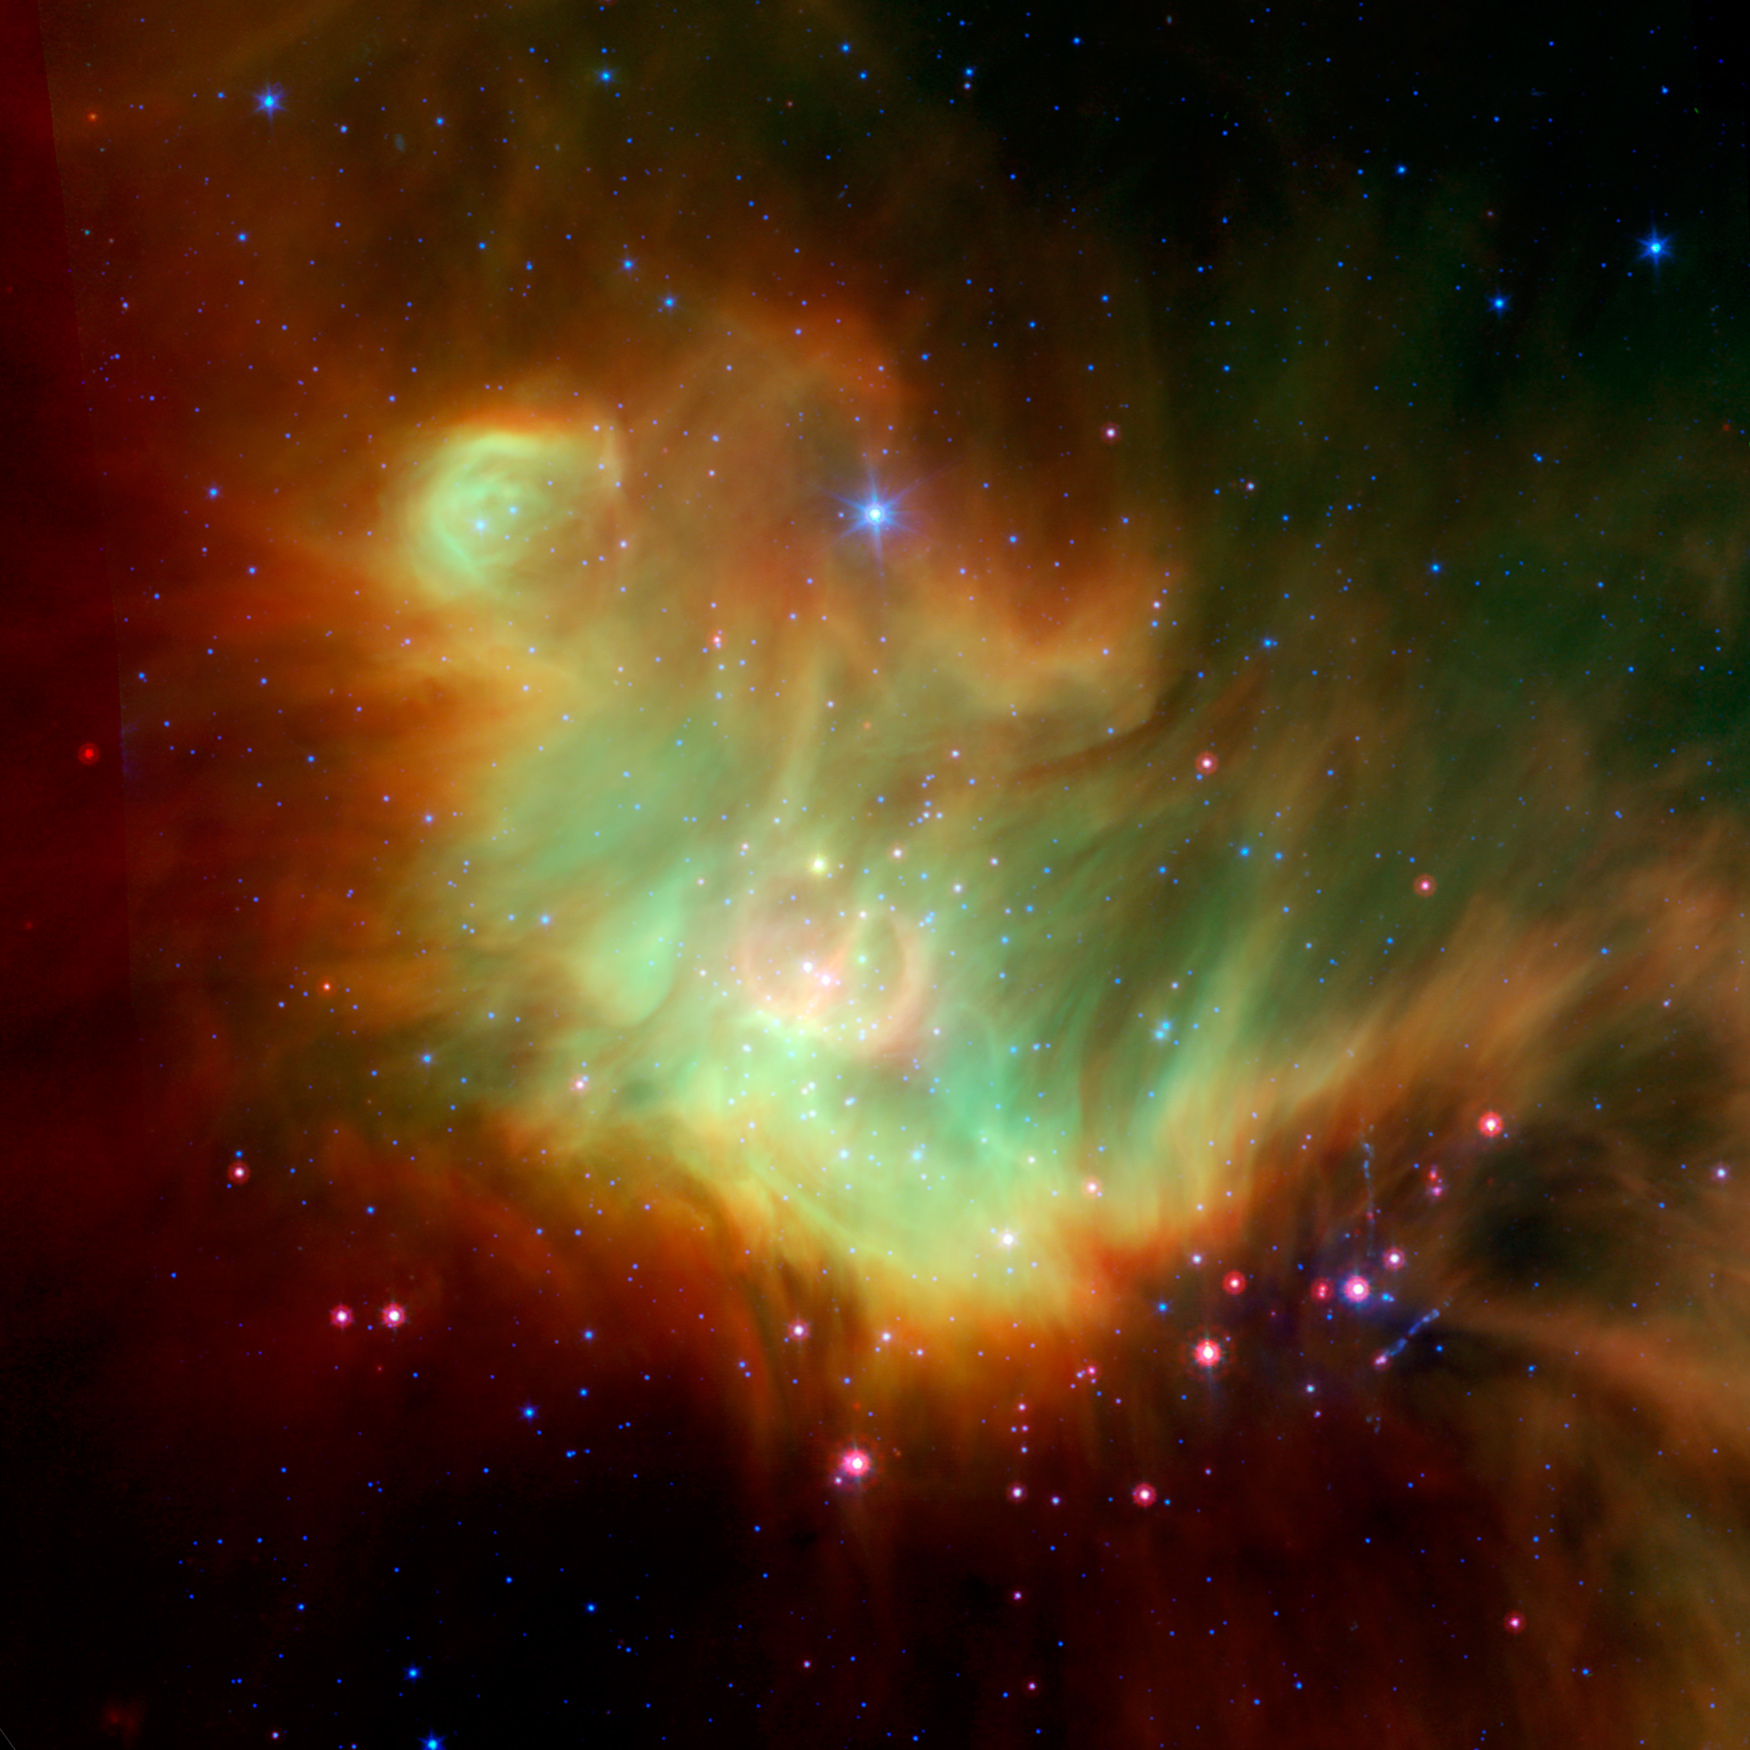 spitzer-space-telescope-observations-reveal-unusual-infant-binary-star